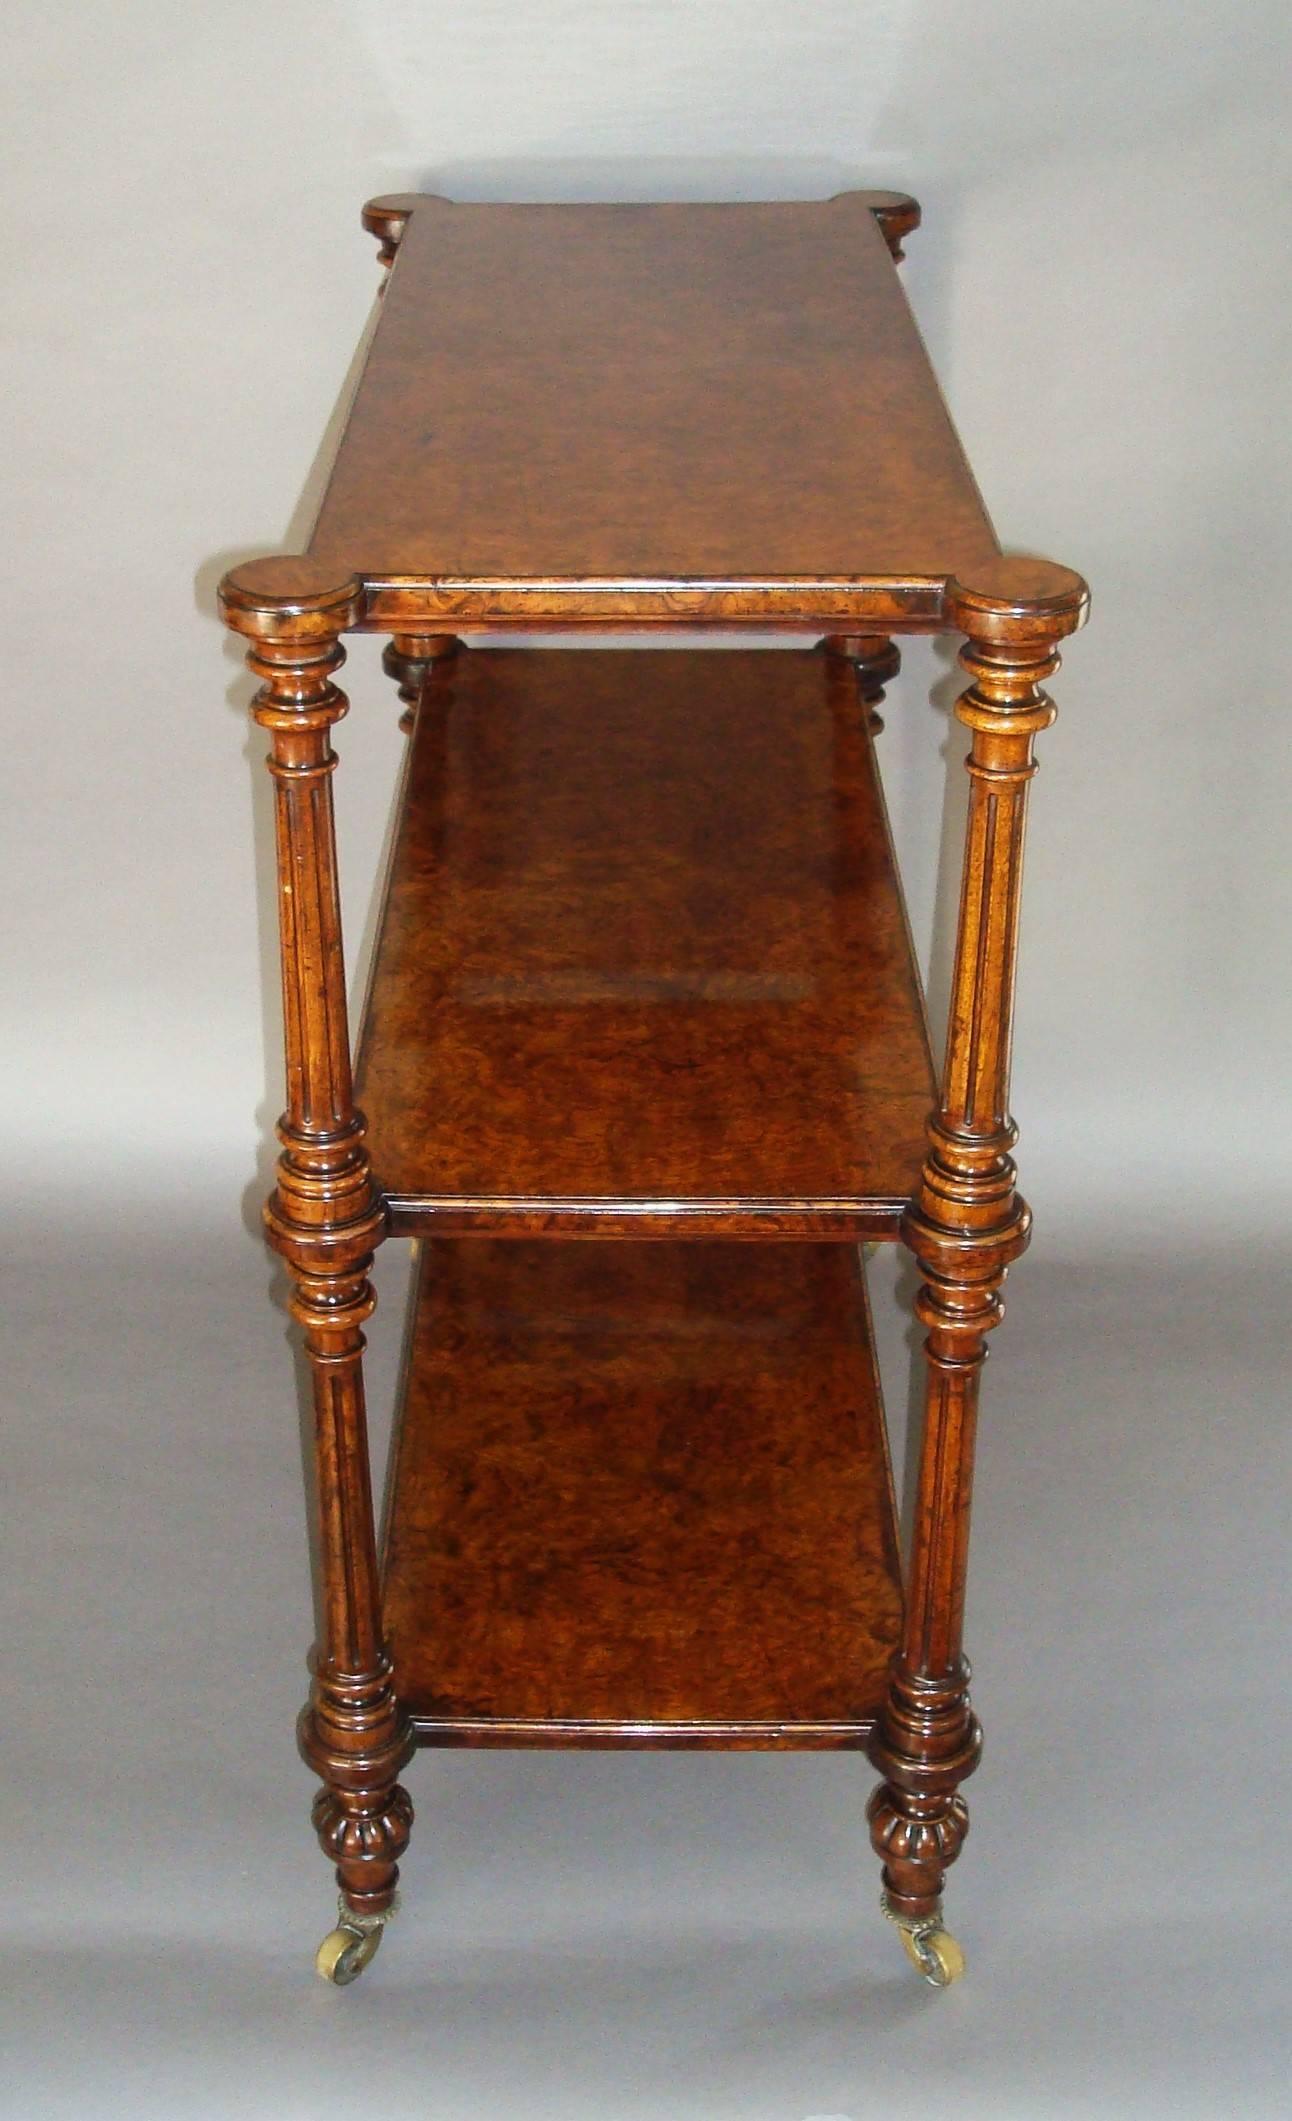 19th Century Burl Walnut Three-Tier Étagère In Excellent Condition For Sale In Moreton-in-Marsh, Gloucestershire